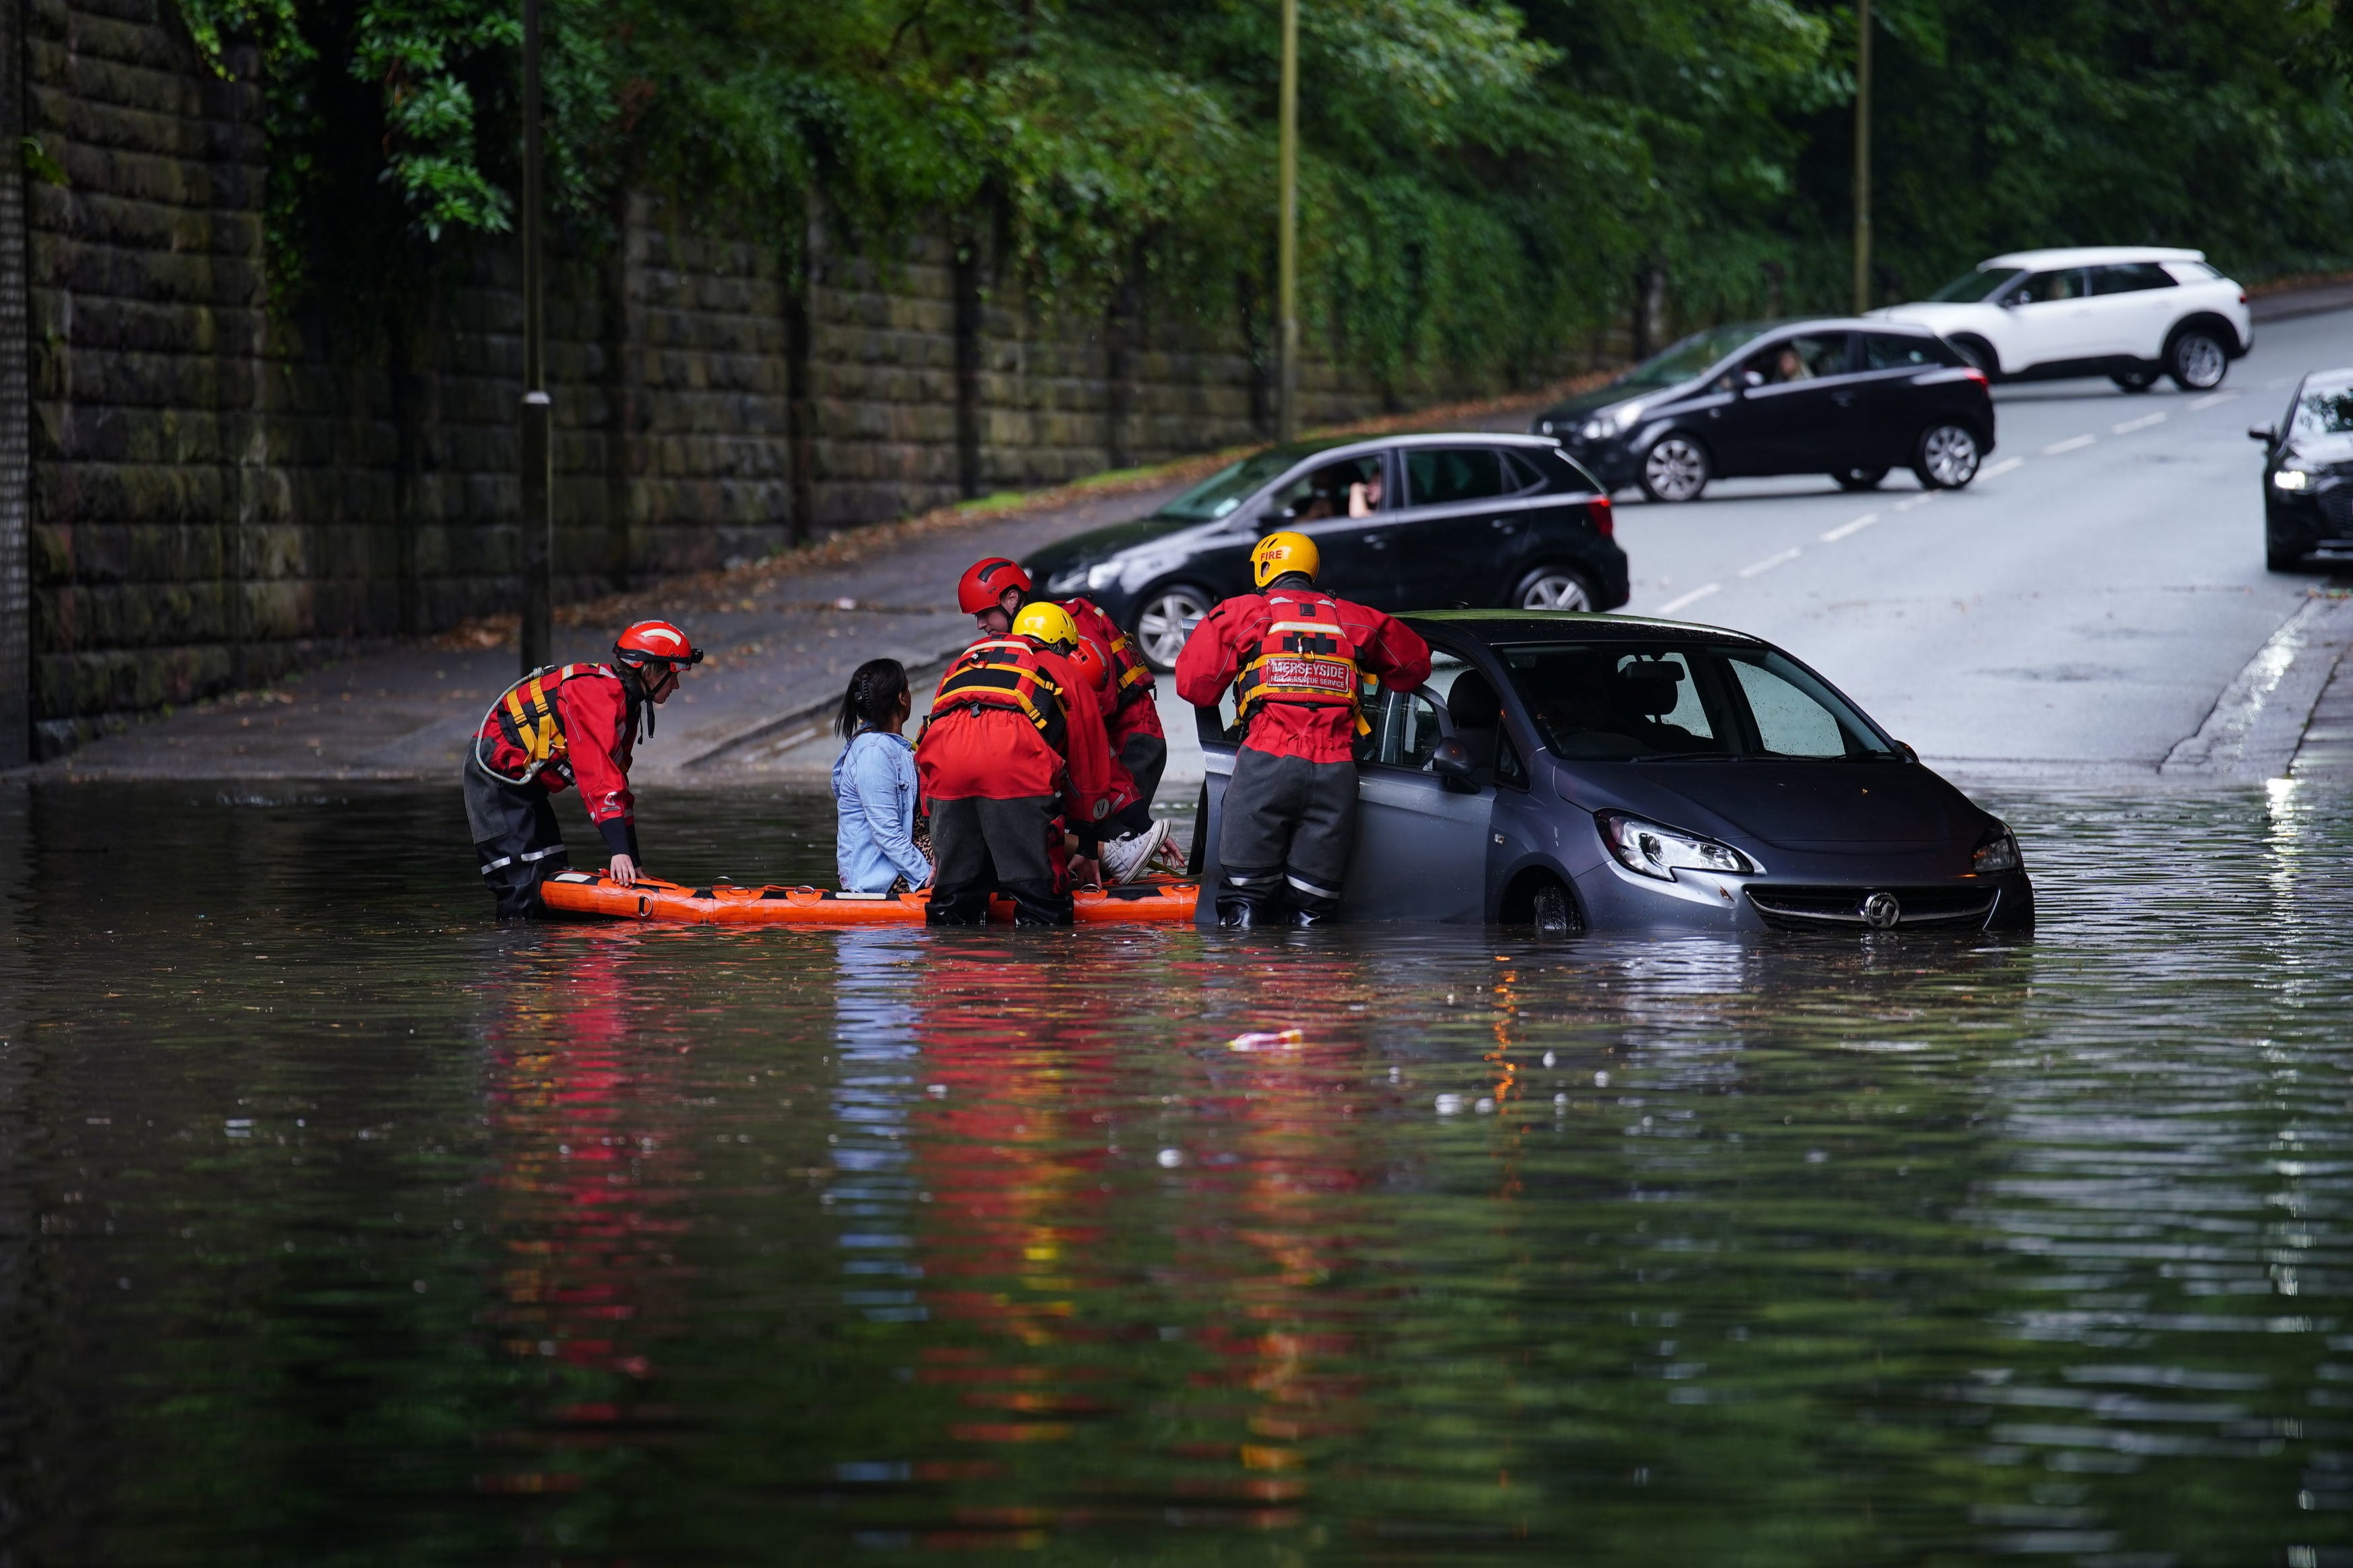 Emergency services rescued a woman from her vehicle during flooding in Mossley Hill just last month